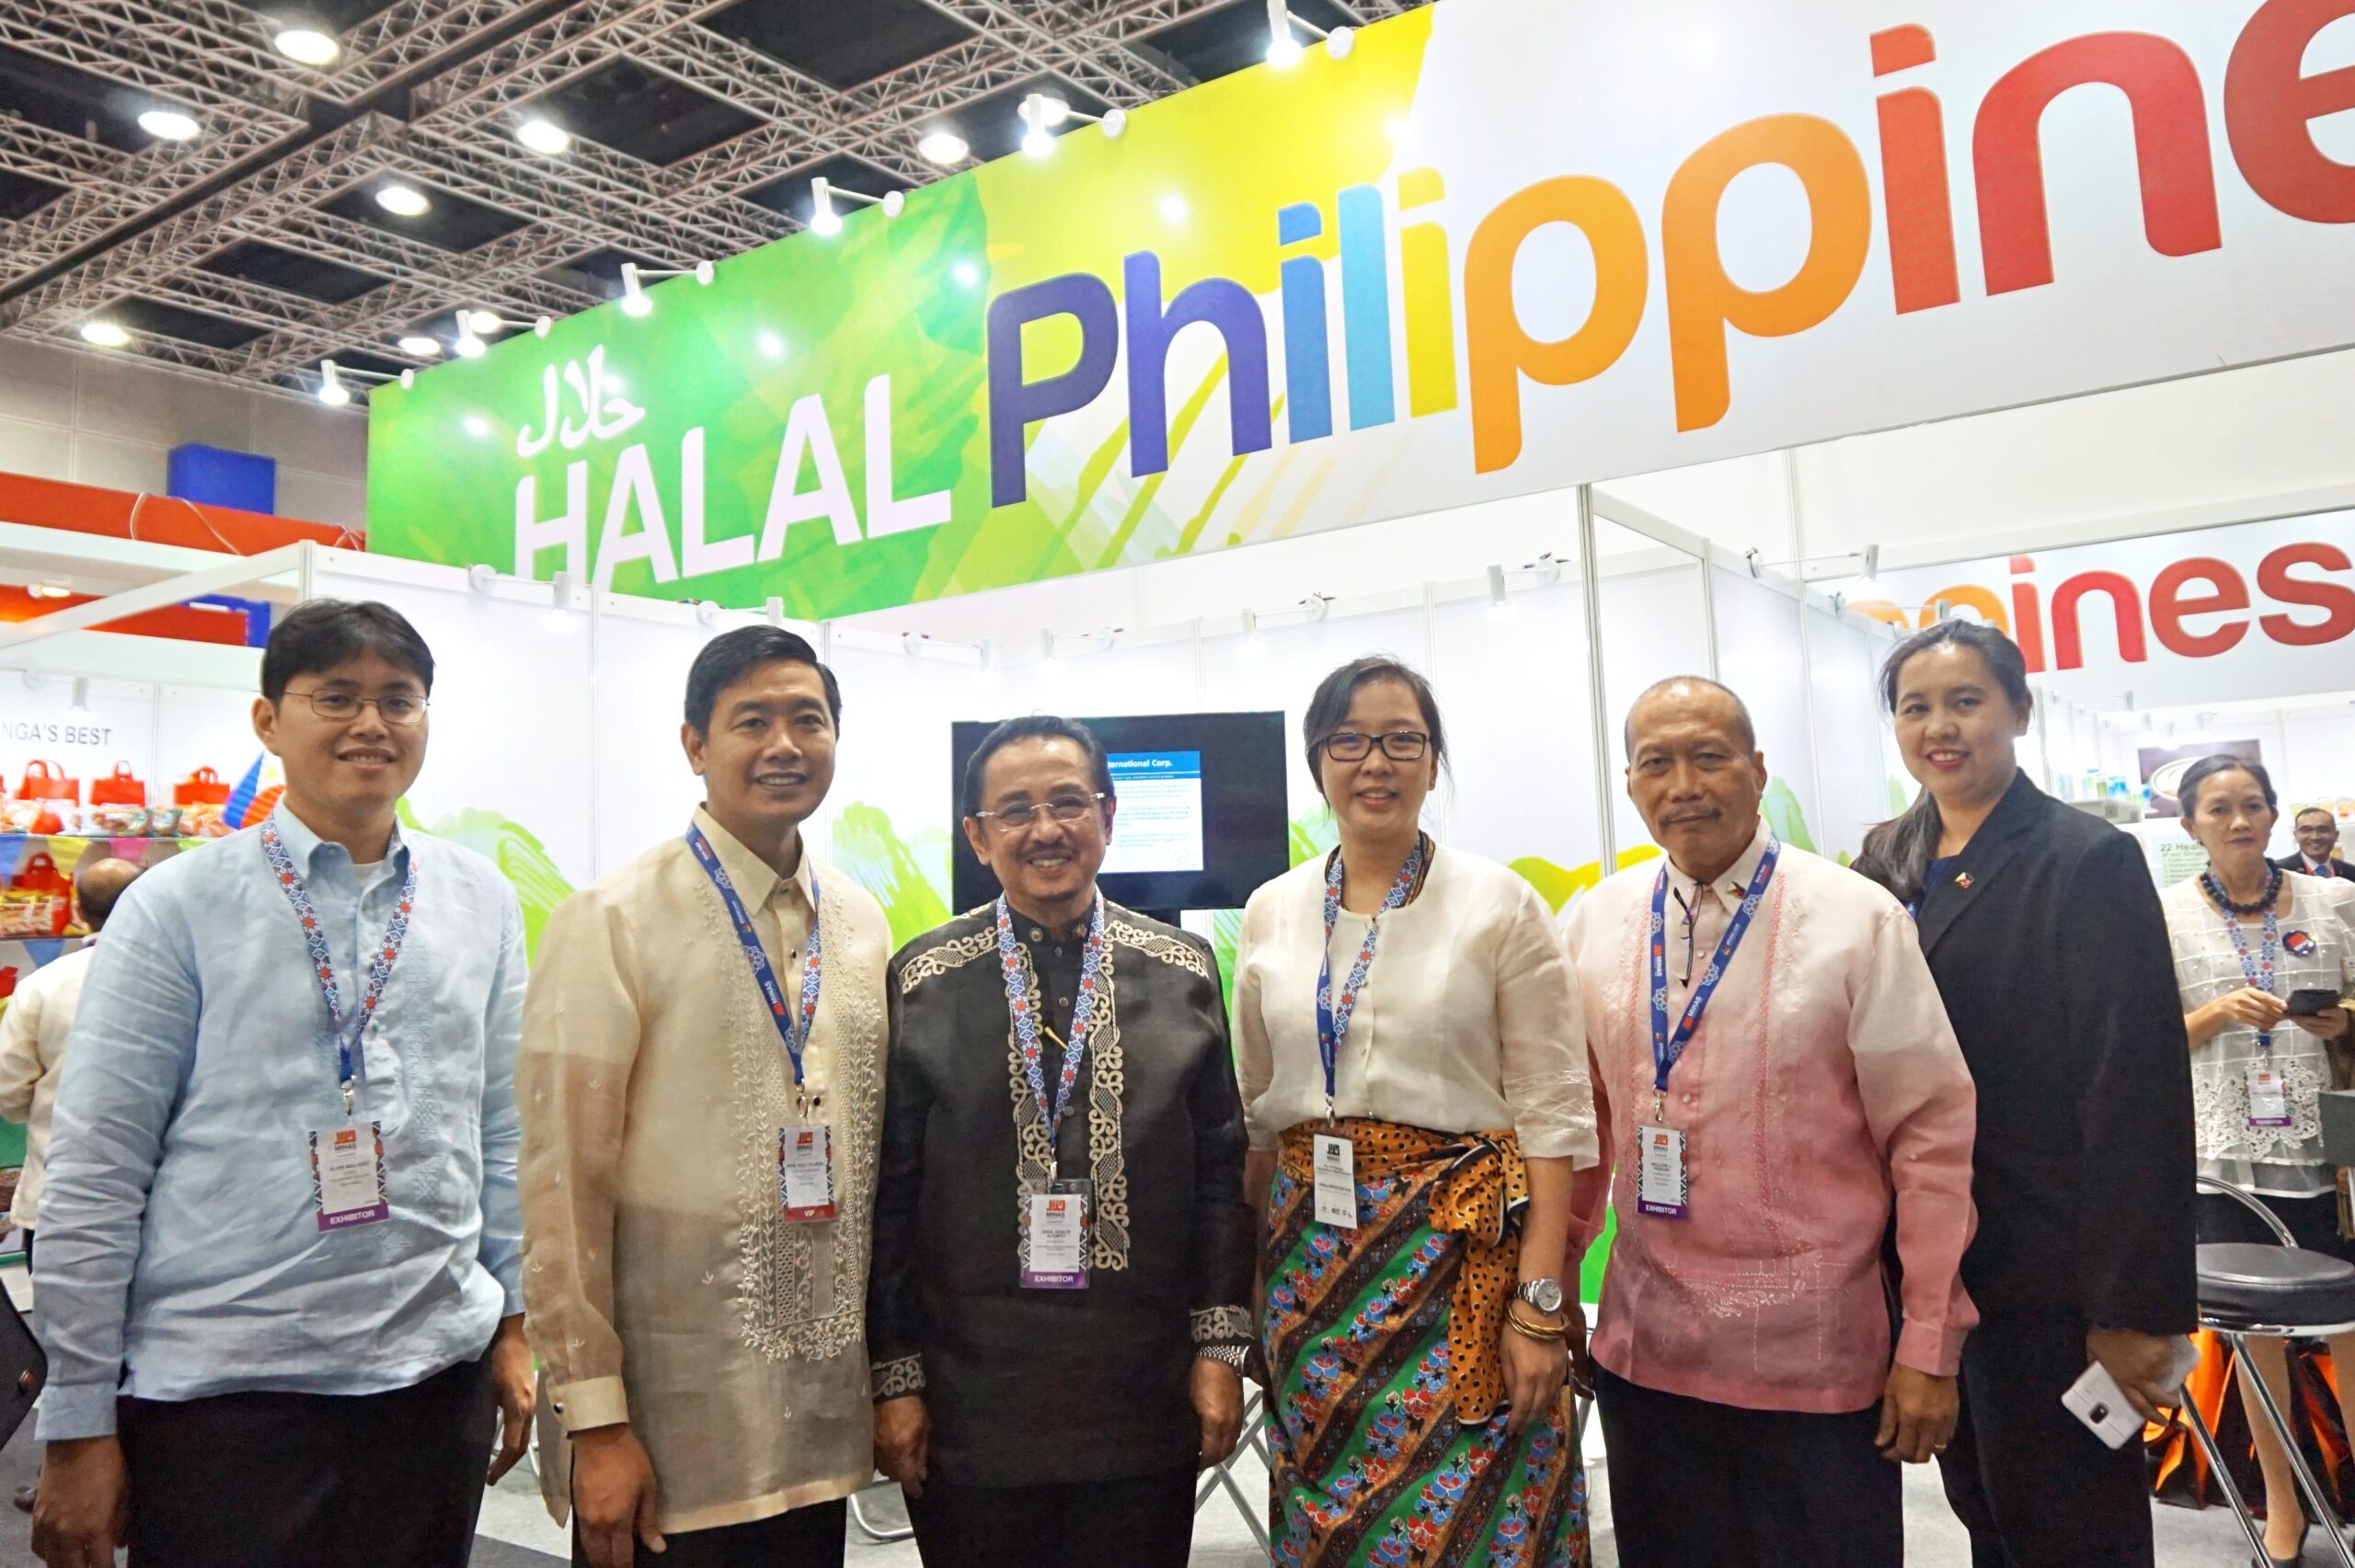 PH can be a leading halal exporter in 2 years – MinDA chief